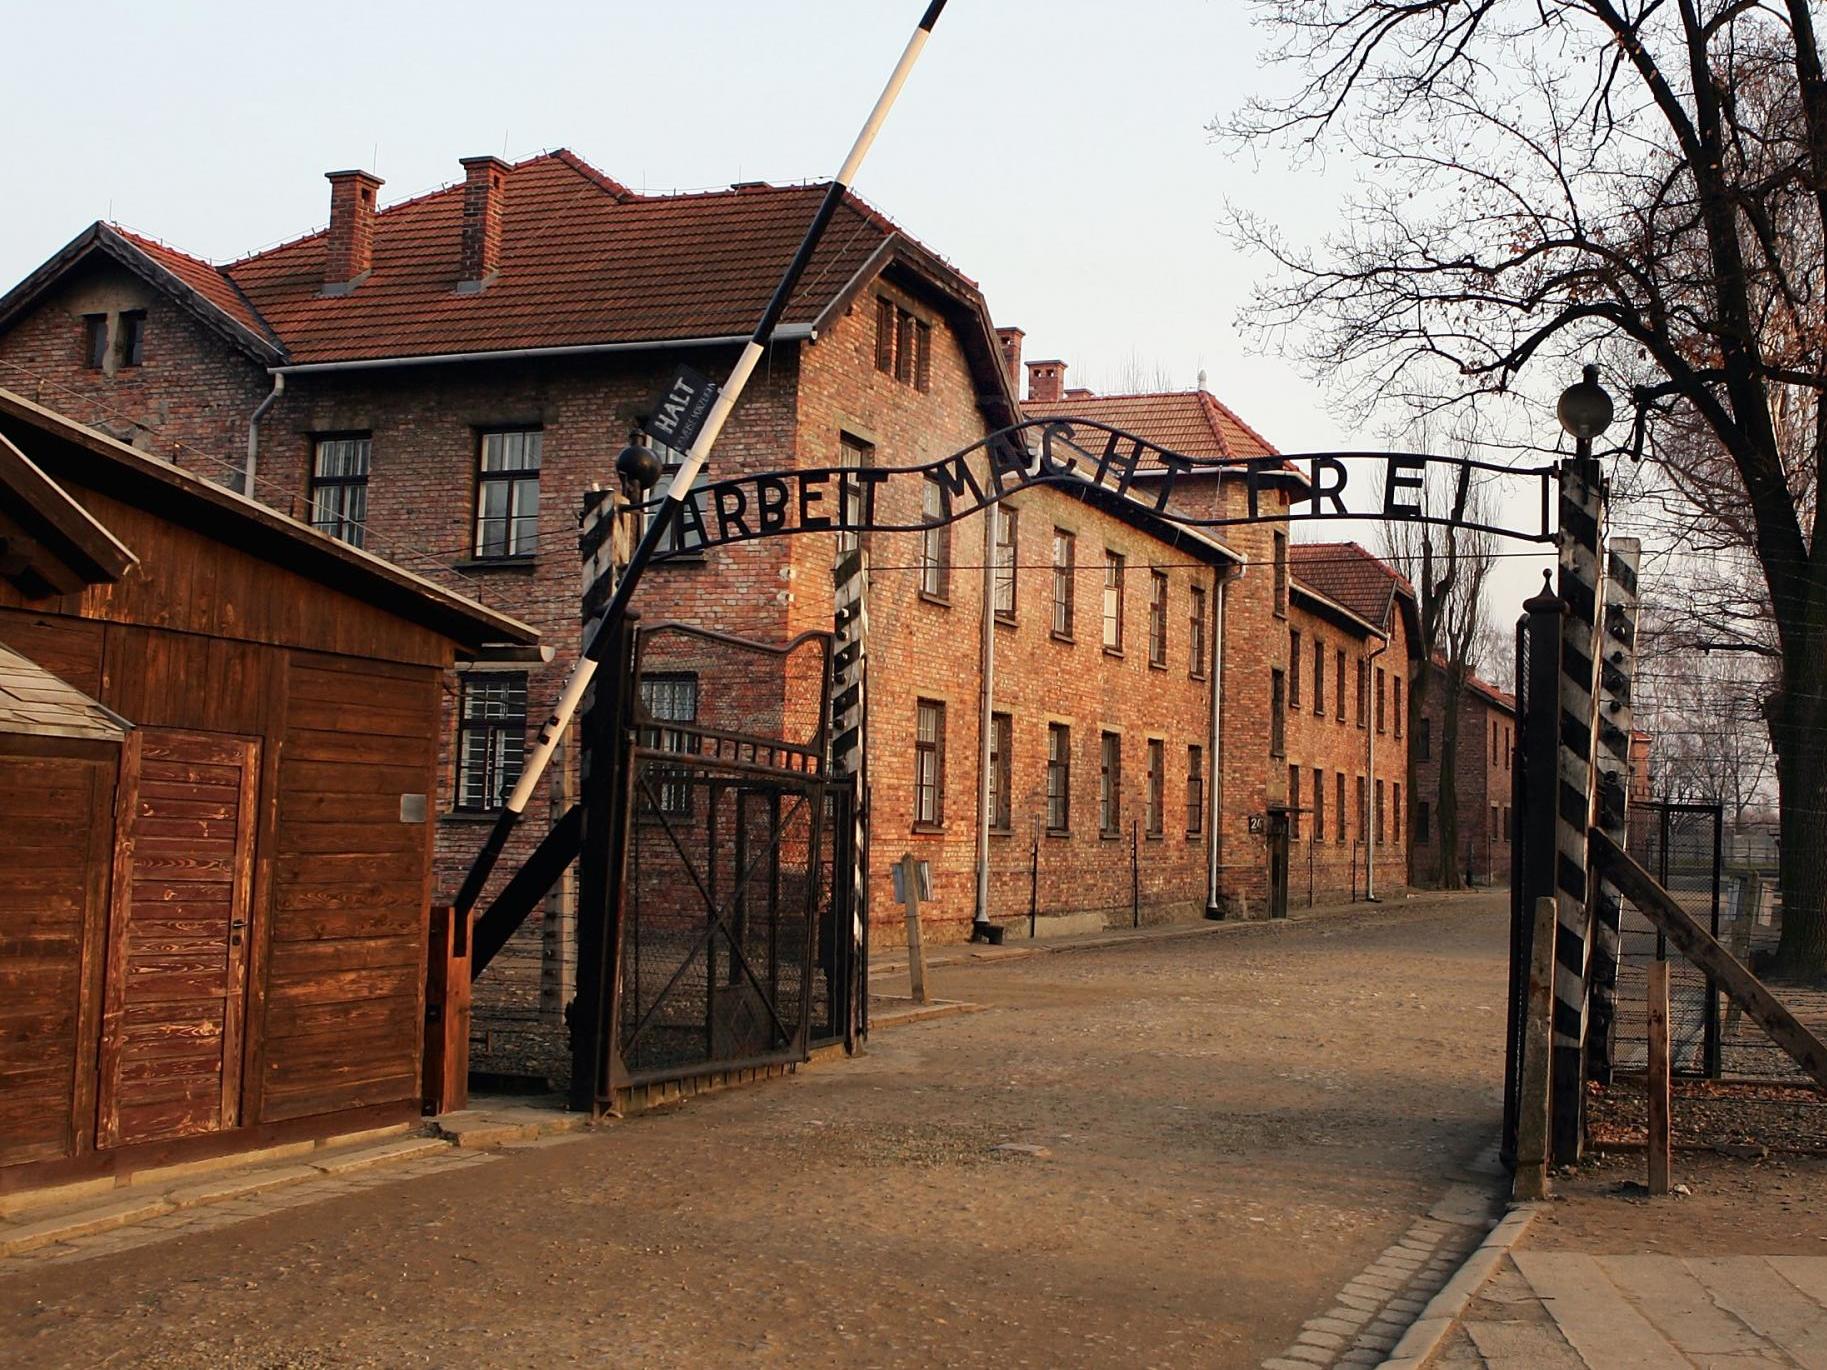 The concentration camp housed at least 1.3 million inmates, 1.1 million of whom were killed there